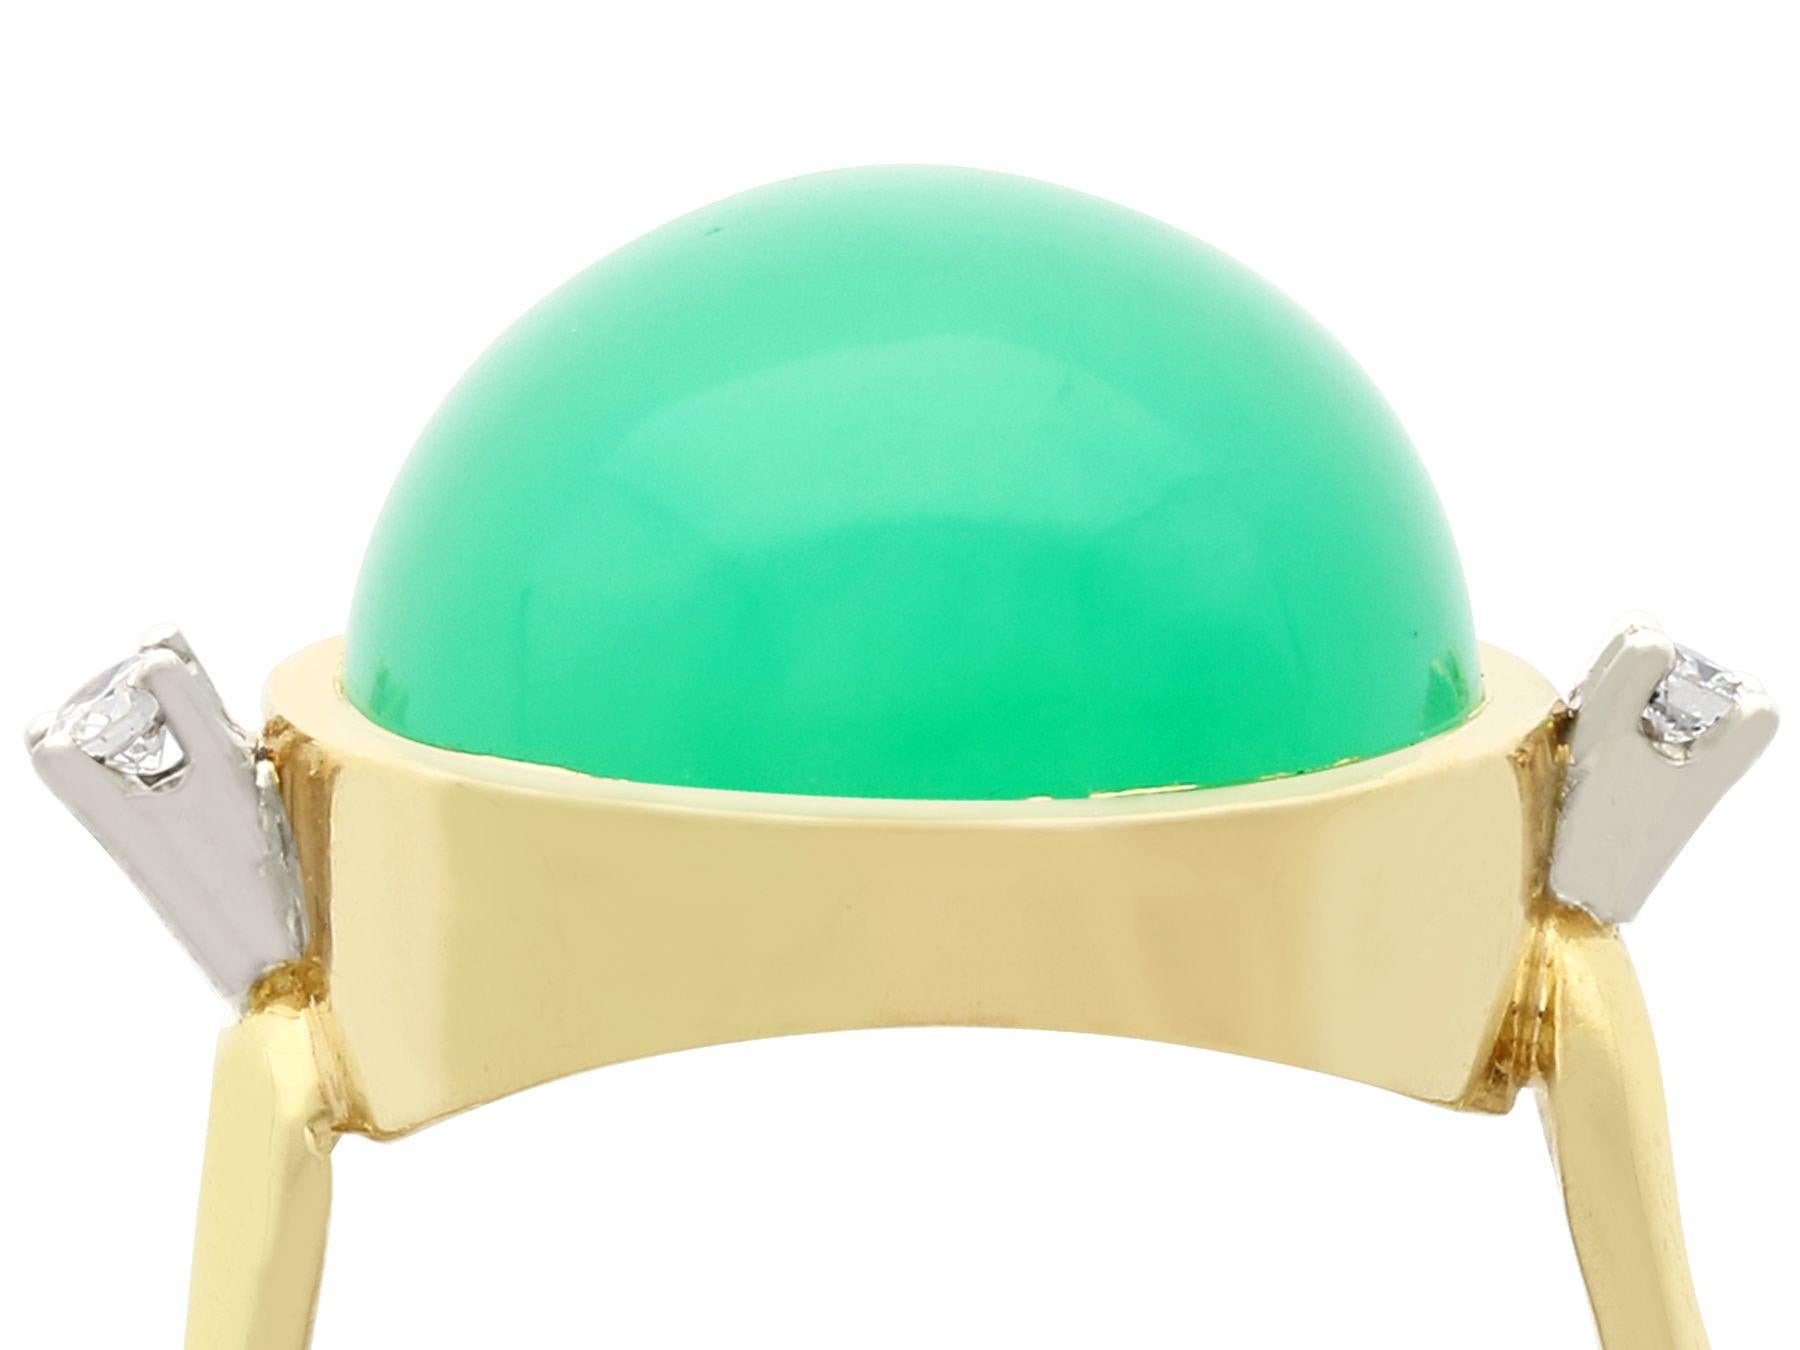 A stunning antique 14.98 Ct chrysoprase and 0.08Ct diamond, 14k yellow gold and 14k white gold set cocktail ring; part of our diverse antique ring collections.

This stunning, fine and impressive chrysoprase ring has been crafted in 14k yellow gold